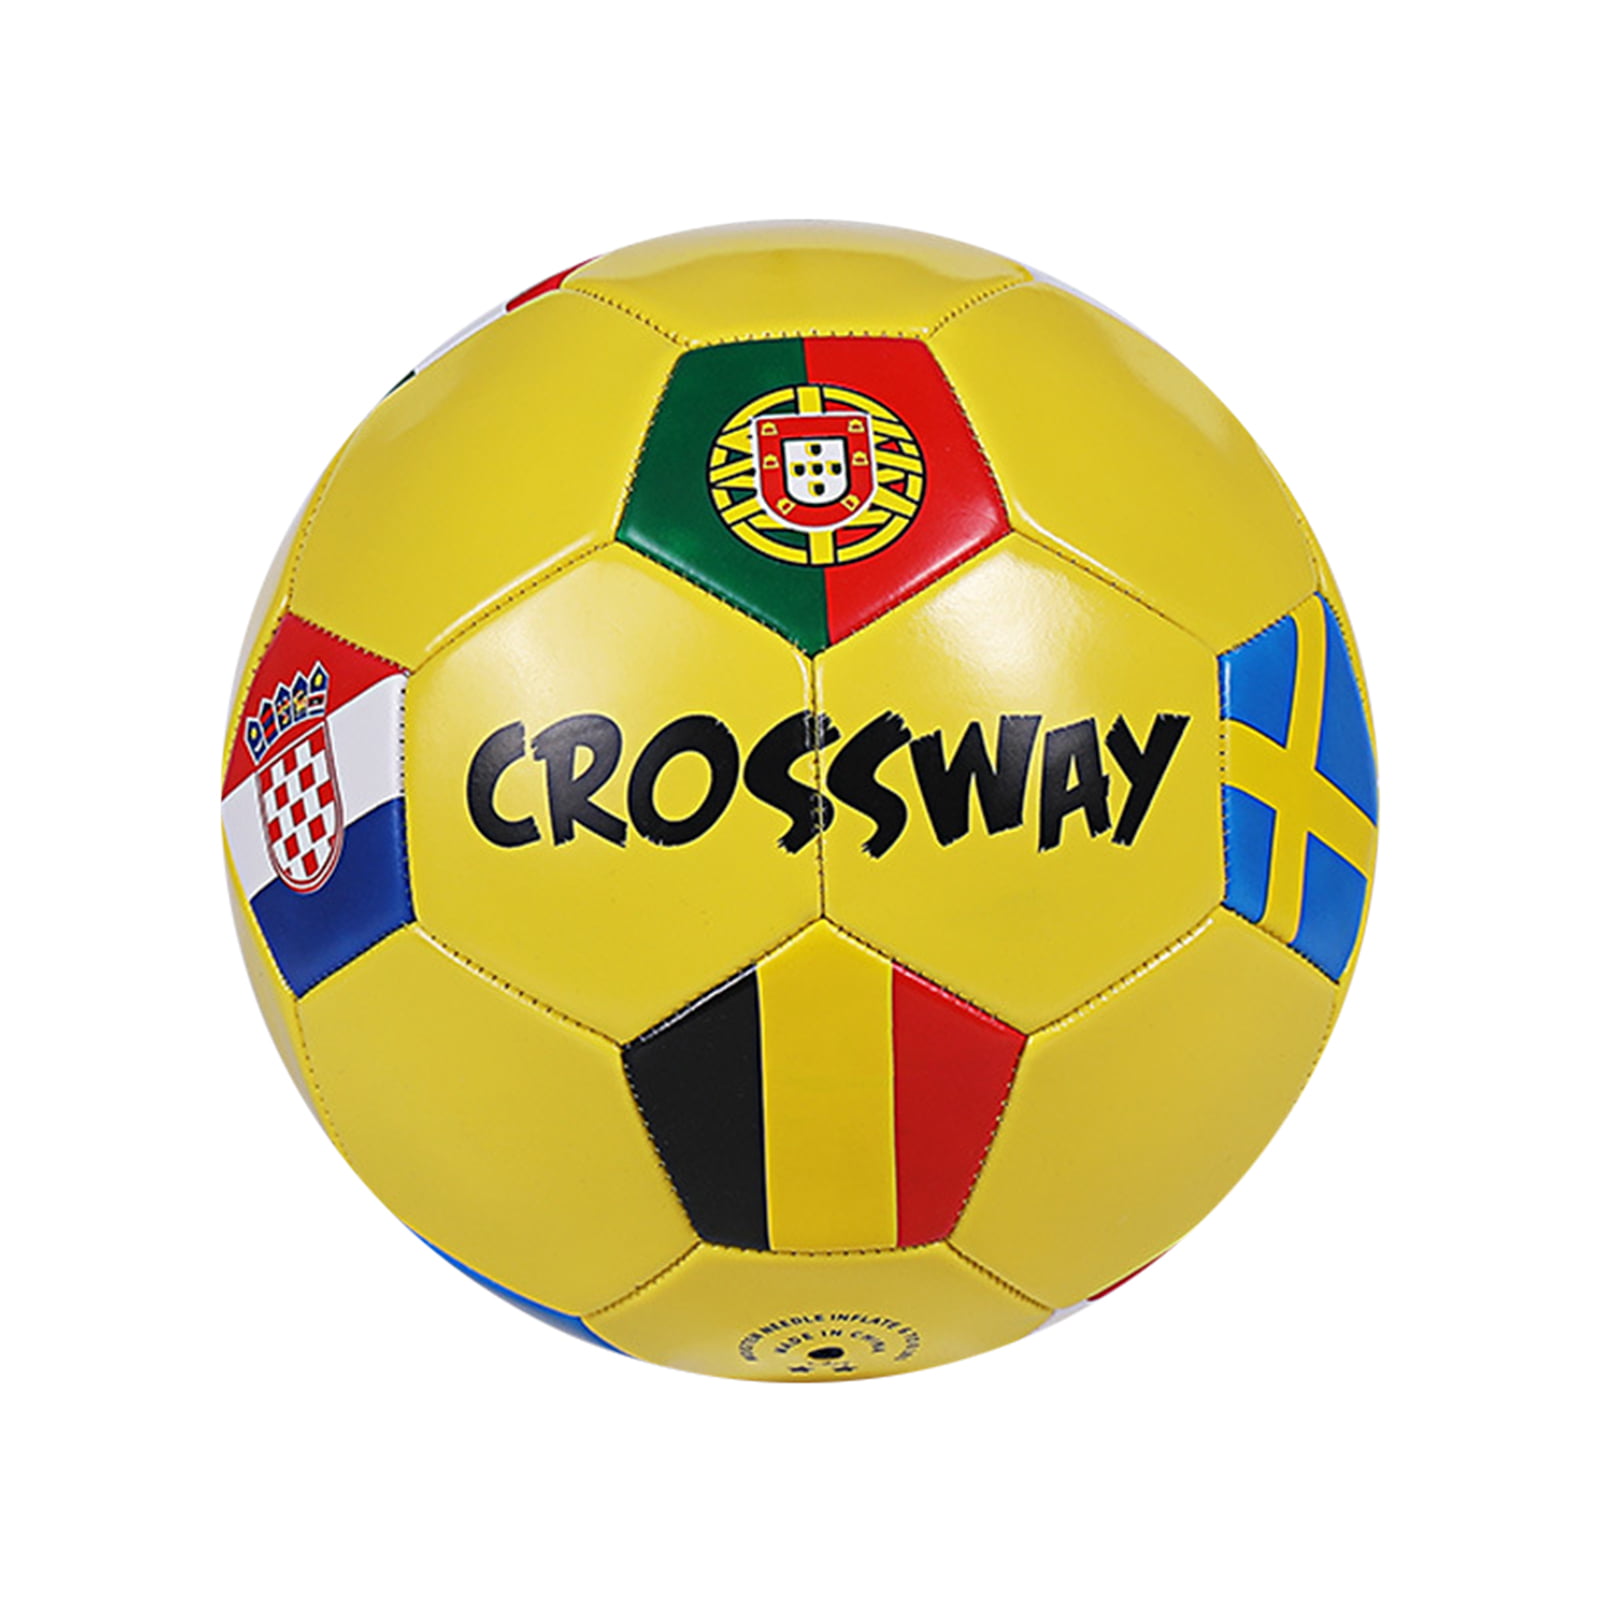 Crossway Sports Soccer Ball Traditional Soccer Balls Size 5 Youth and Adult Outdoor Training Size 4 Size 3 w/ Pump & Carry Bag for Toddlers Kids